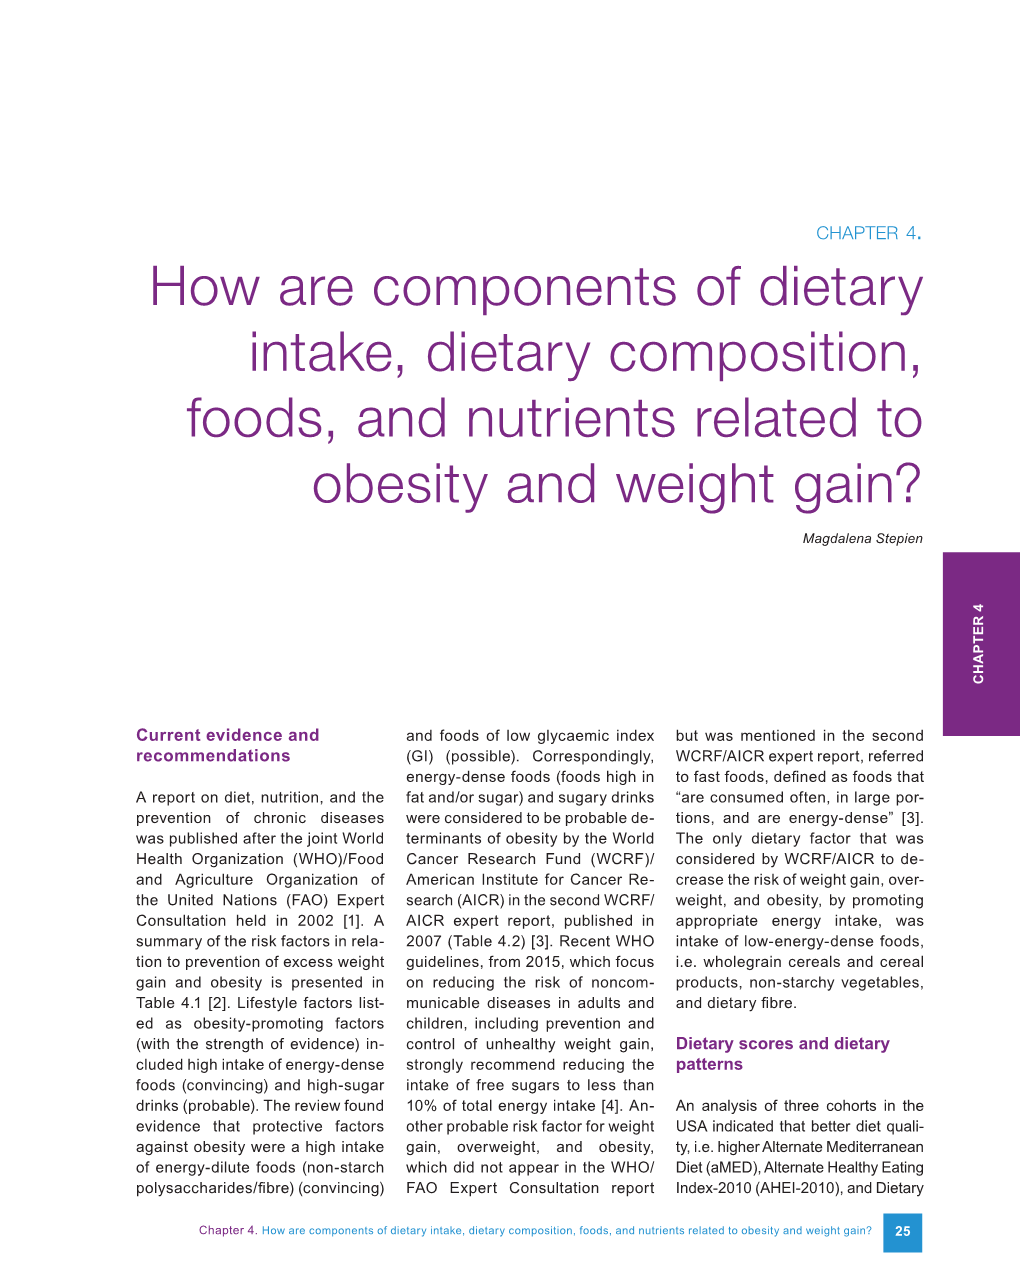 How Are Components of Dietary Intake, Dietary Composition, Foods, and Nutrients Related to Obesity and Weight Gain?